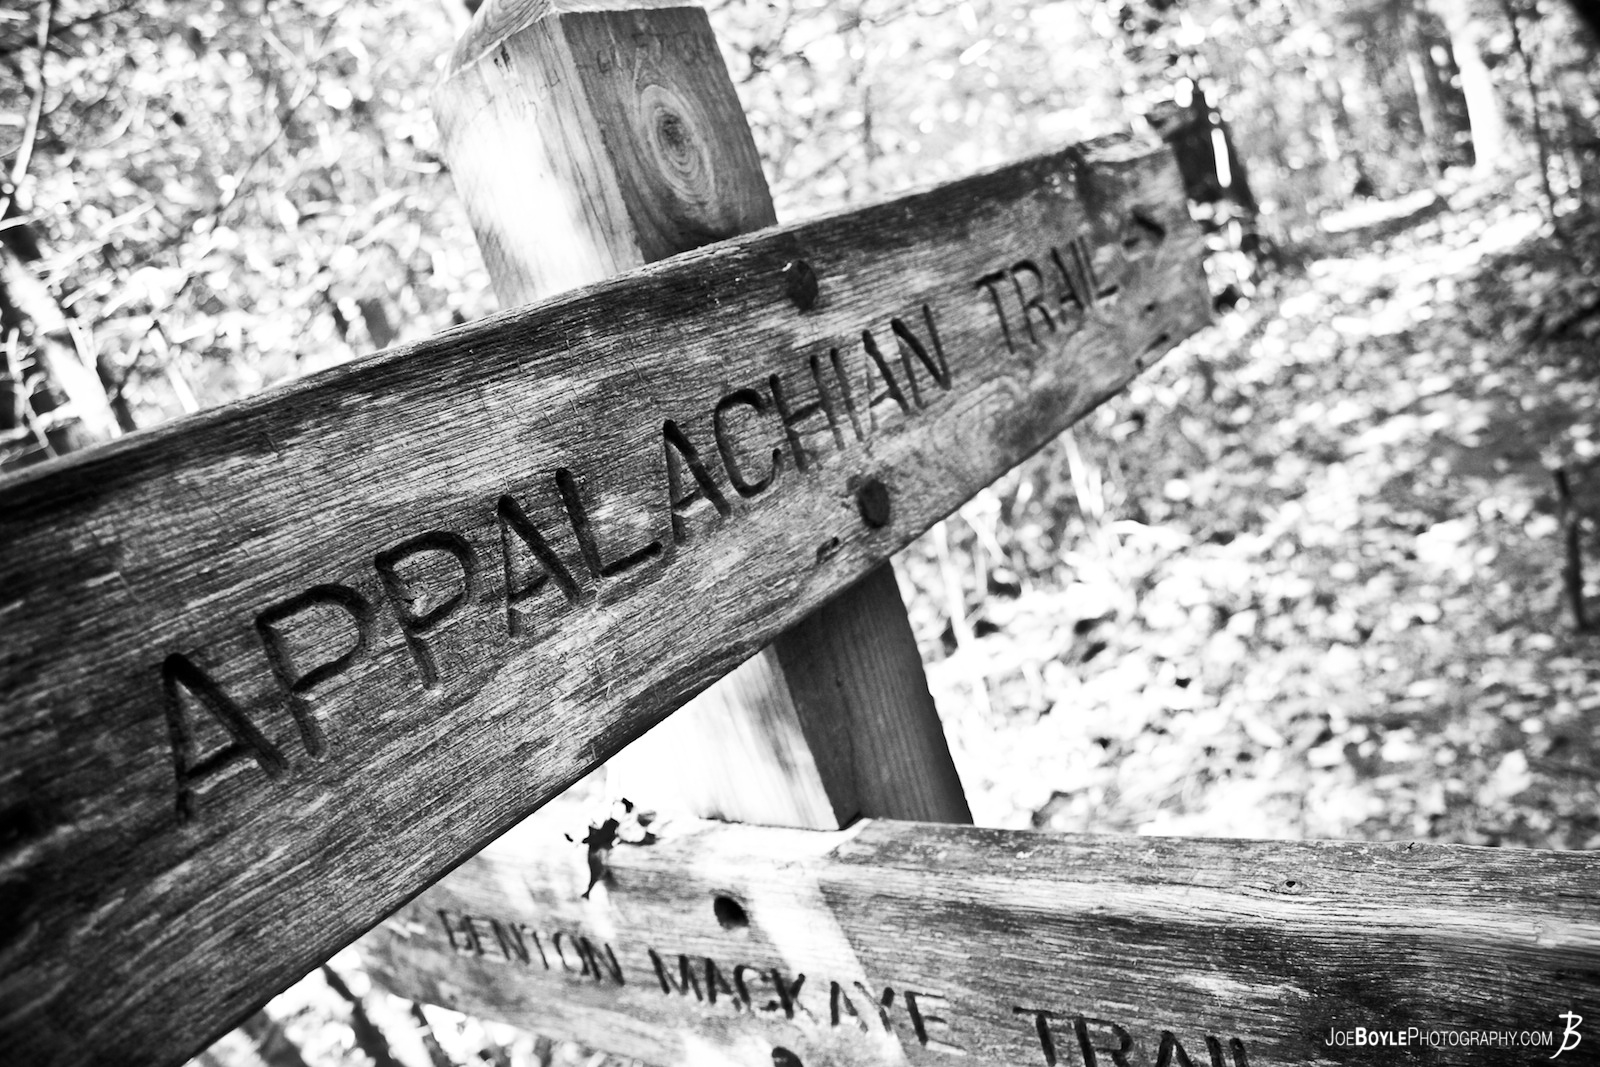  This is one of the first signs on the Appalachian Trail near Springer Mountain. I was only doing a week long stint of the trail up to Unicoi Gap. I'm looking forward to doing more of it. If not just thru hiking it... 